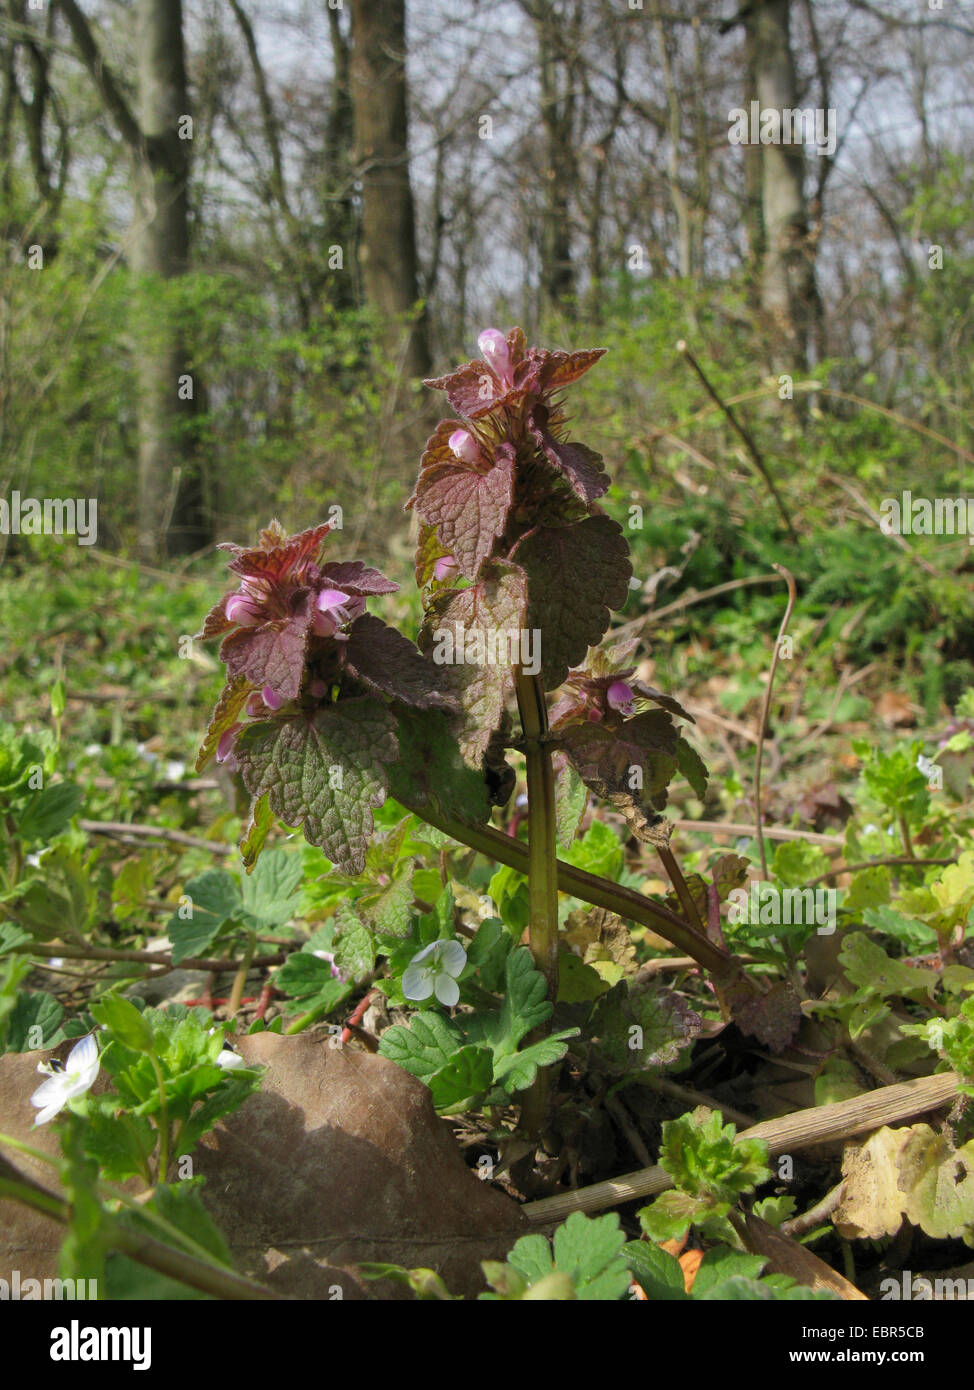 red dead-nettle, purple deadnettle (Lamium purpureum), blooming at a forest edge, Germany, Lower Saxony Stock Photo